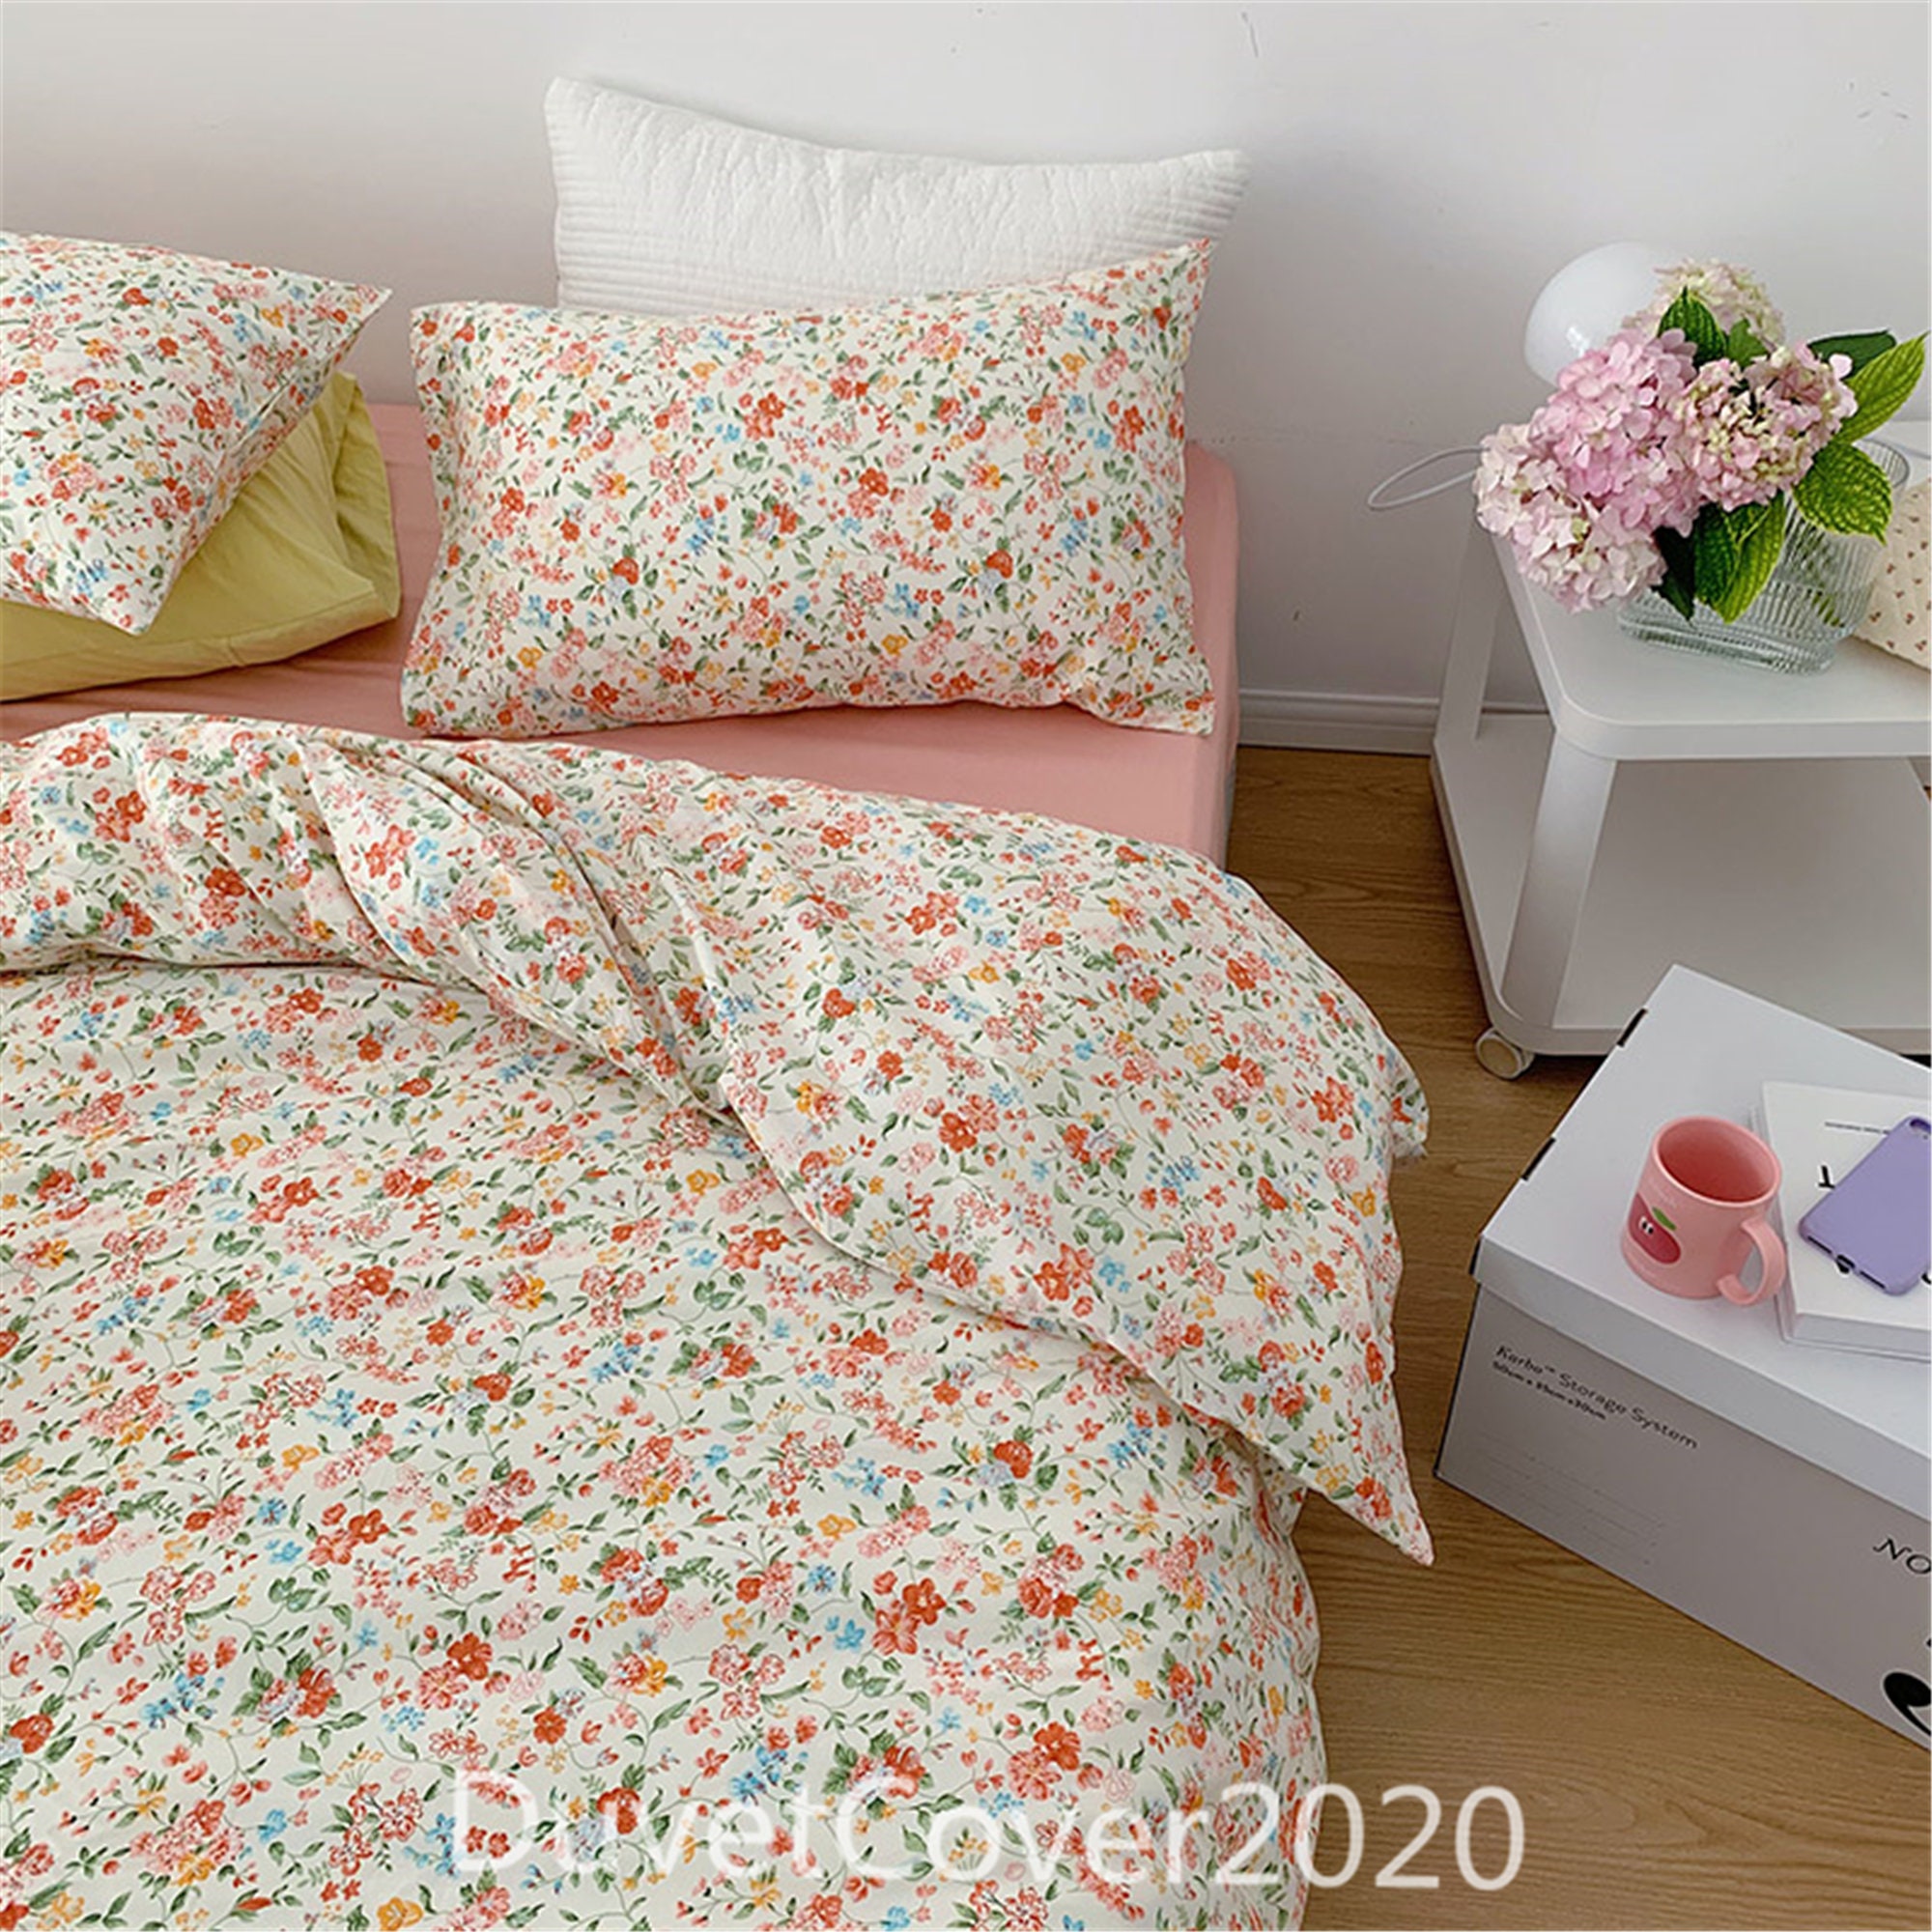 Cotton Complete Bedding Set Duvet Quilt Cover Fitted Sheet Pillowcase 